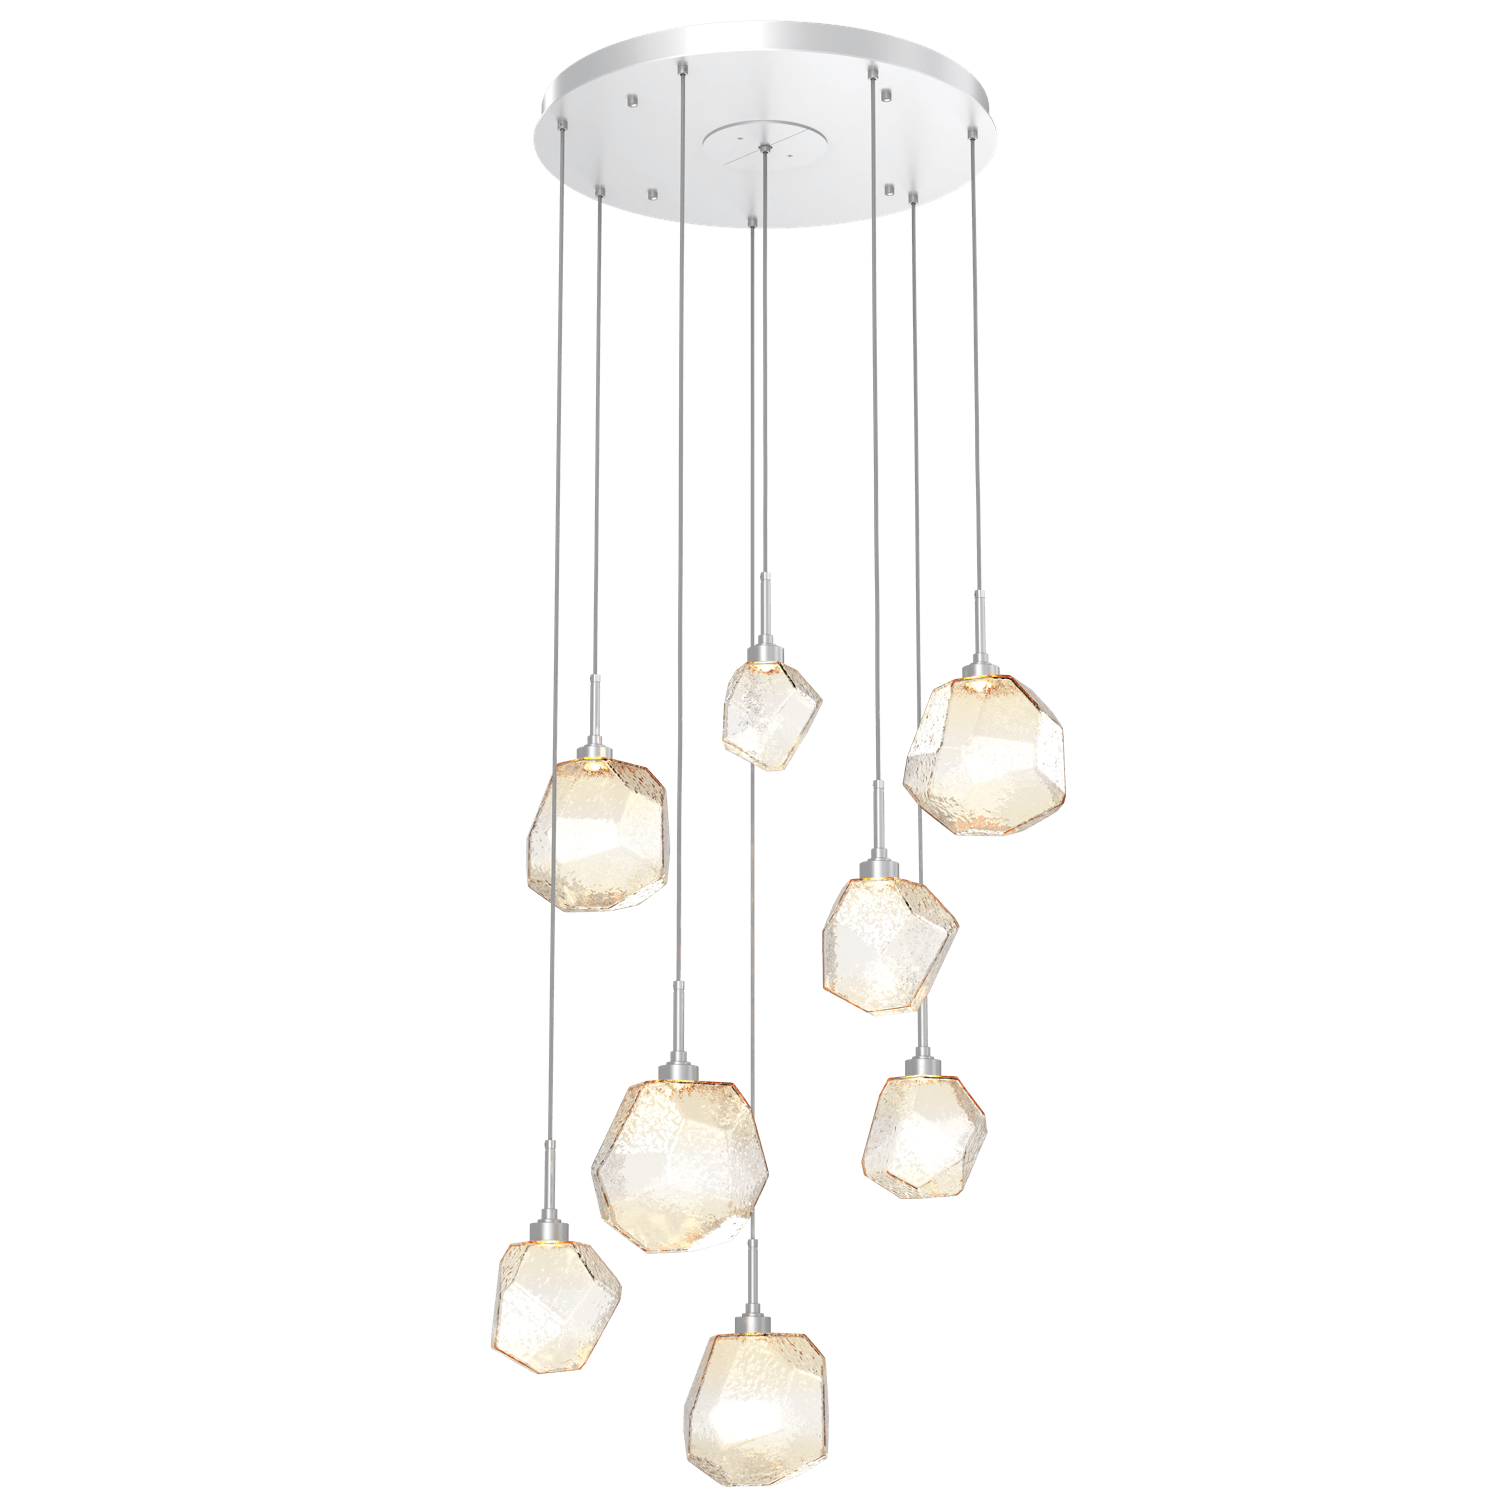 CHB0039-08-CS-A-Hammerton-Studio-Gem-8-light-round-pendant-chandelier-with-classic-silver-finish-and-amber-blown-glass-shades-and-LED-lamping